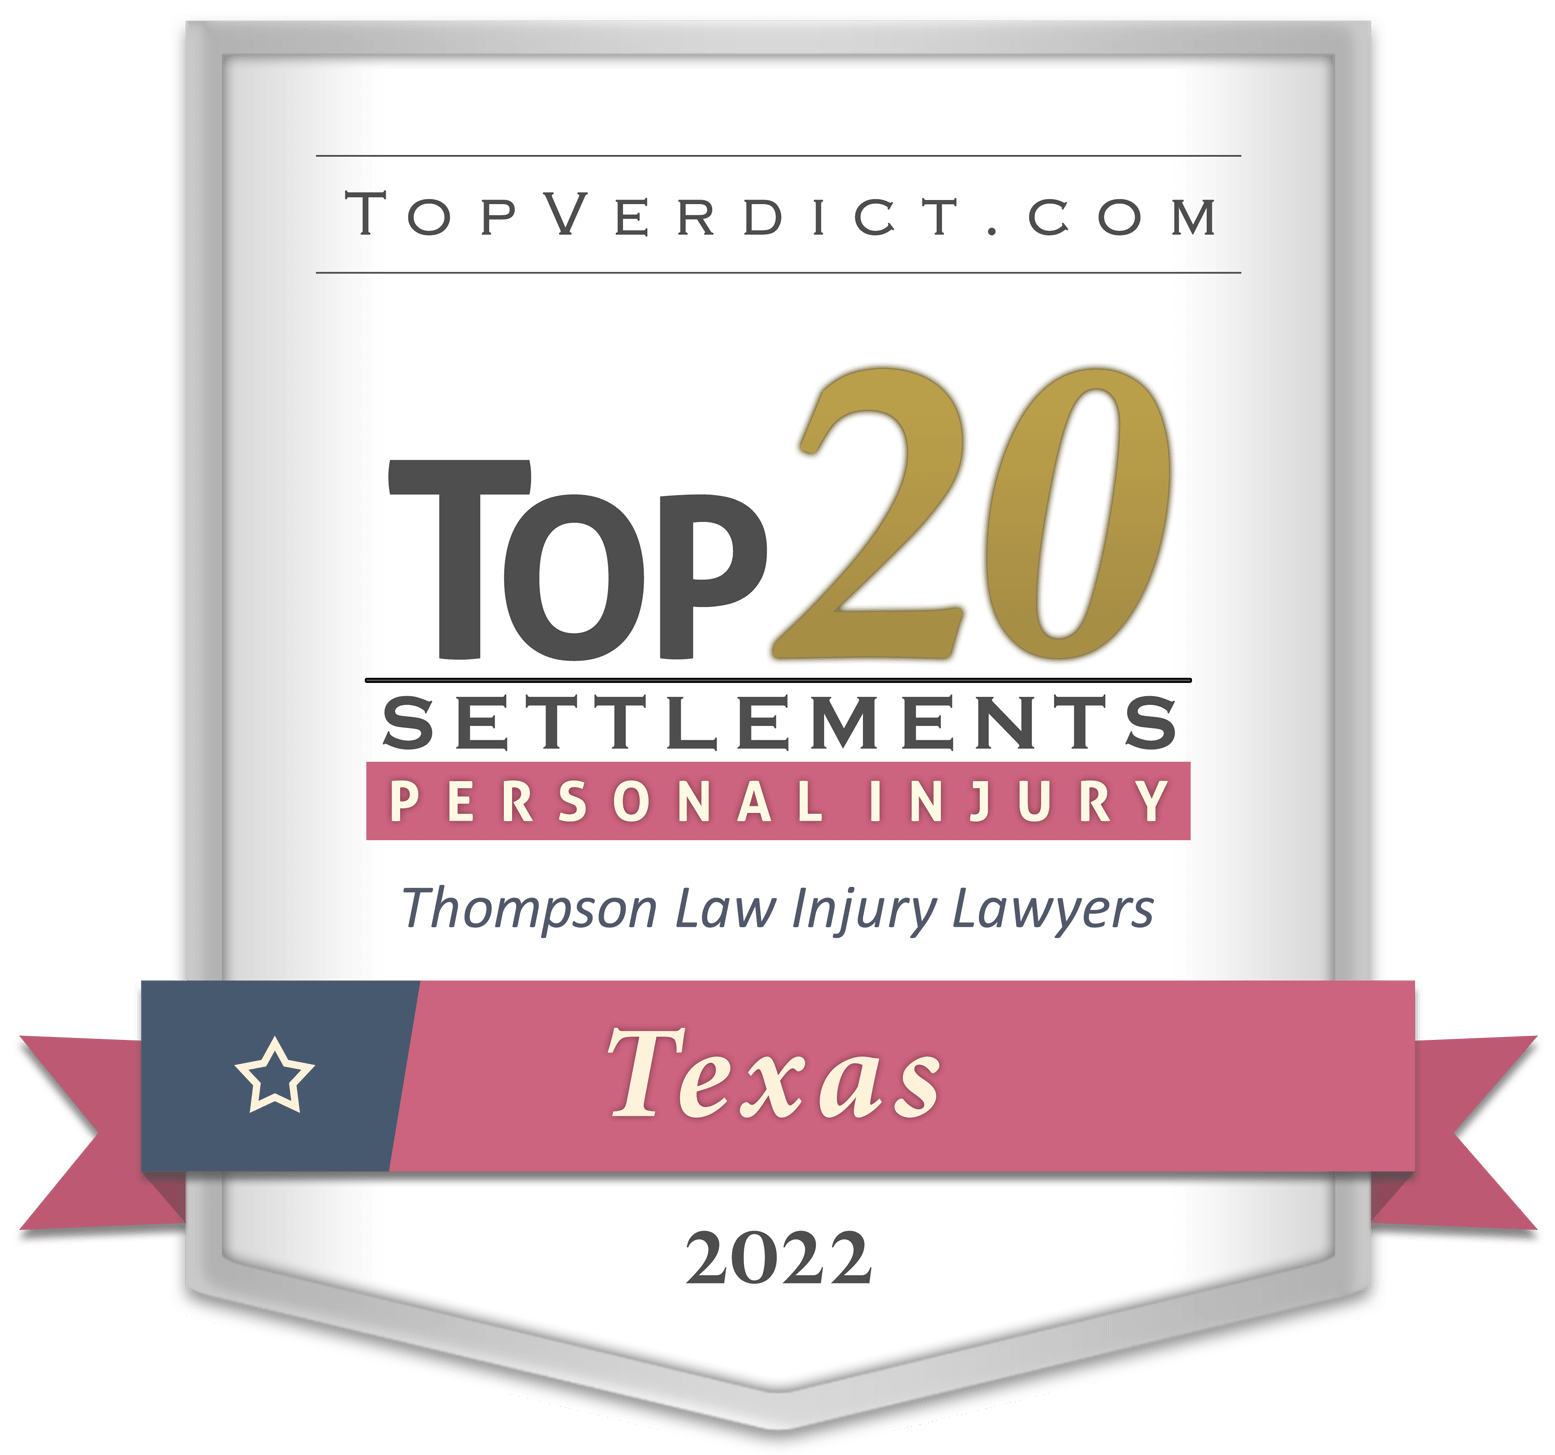 TopVerdict Top 20 personal injury settlements in Texas 2022 badge - Sugar Land Wrongful Death Lawyers